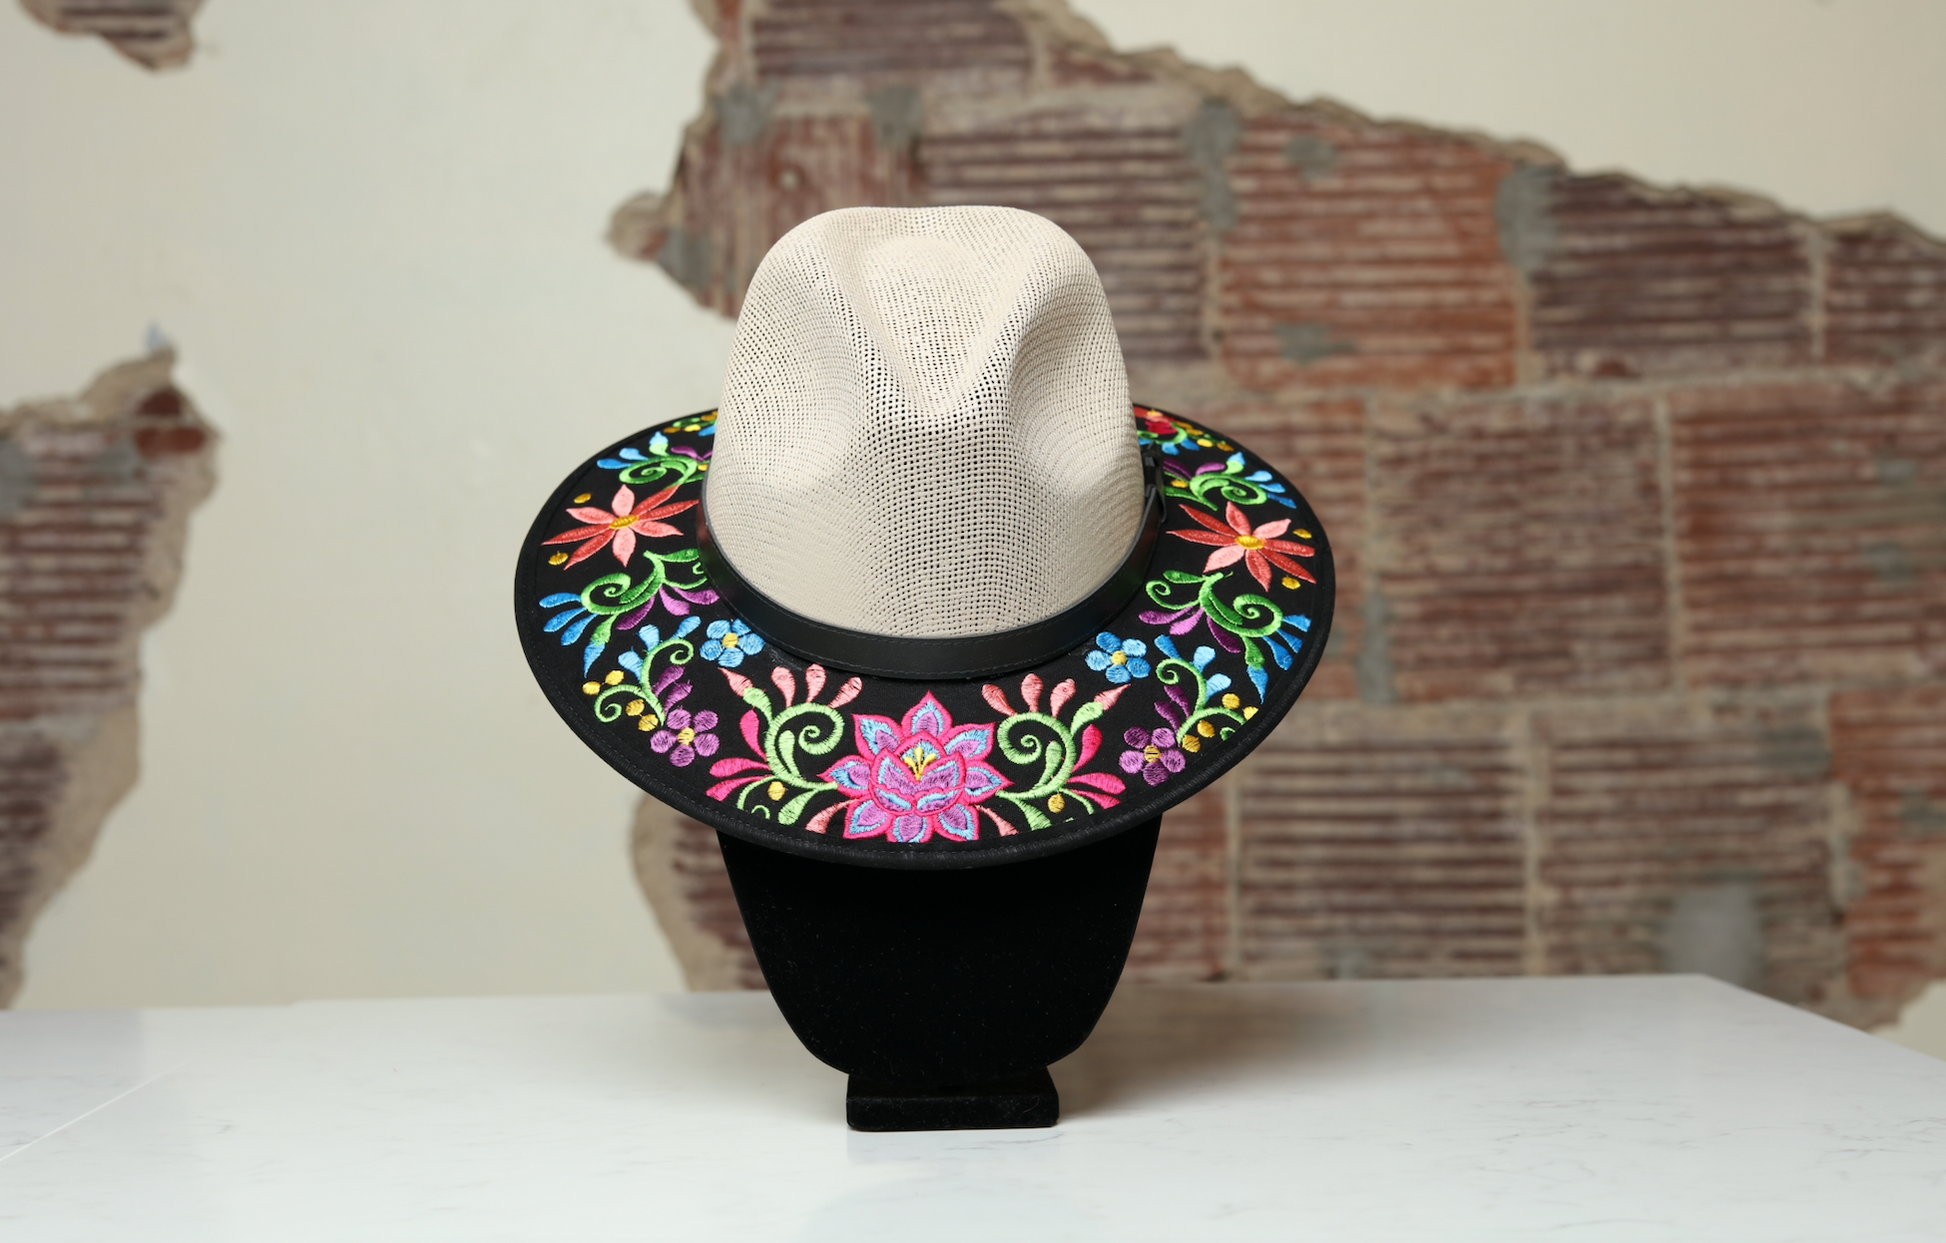 Hand embroidered cream brimmed hat, the perfect accessory to add fun and style to any outfit. With embroidered flowers and leaves in different colors as multicultural embellishments.